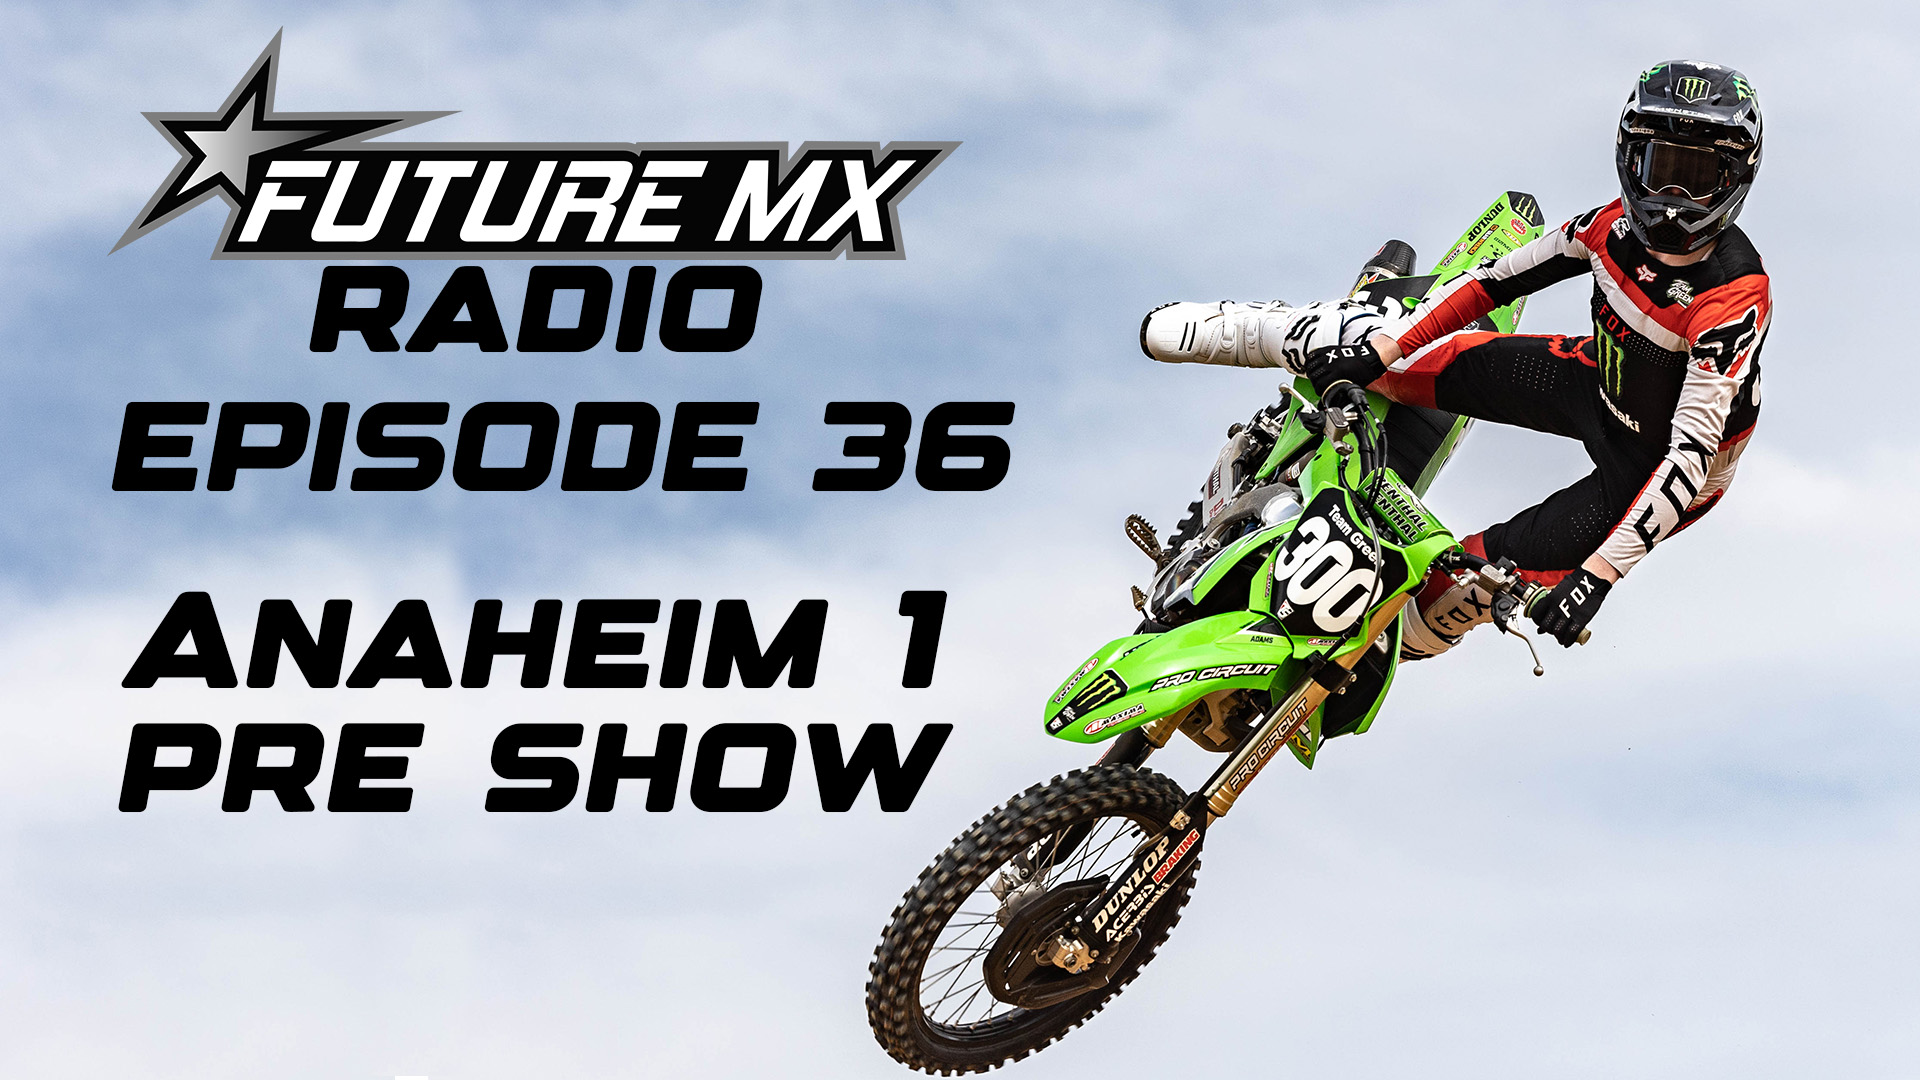 Future Motocross Radio | Episode 36: Anaheim 1 Supercross Pre Show Discussion with Dave Dukey